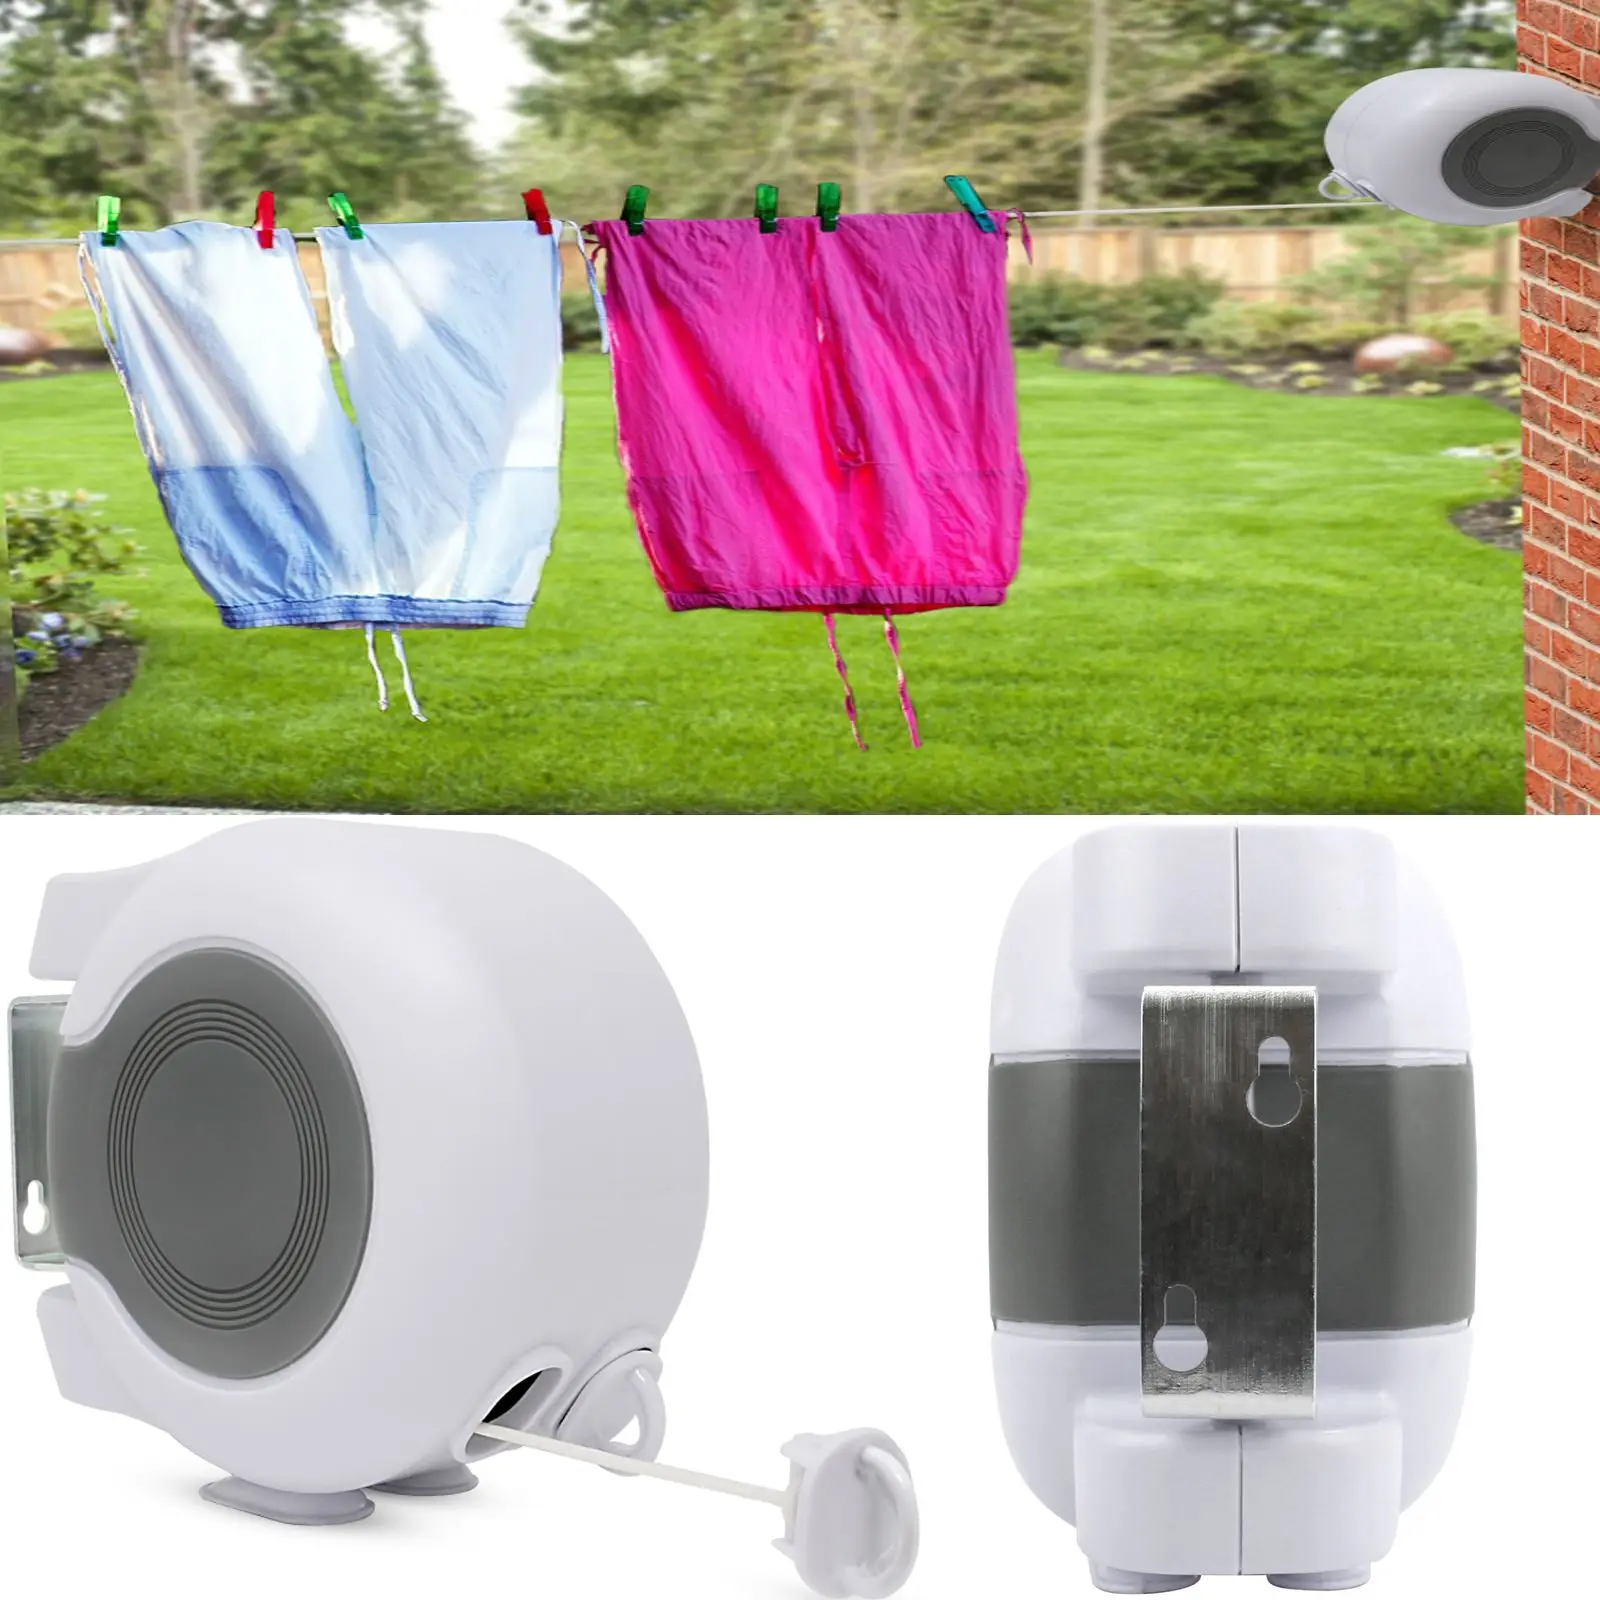 Портативная сушилка. Retractable clothes line airer Reel Wall Mounted washing Laundry.